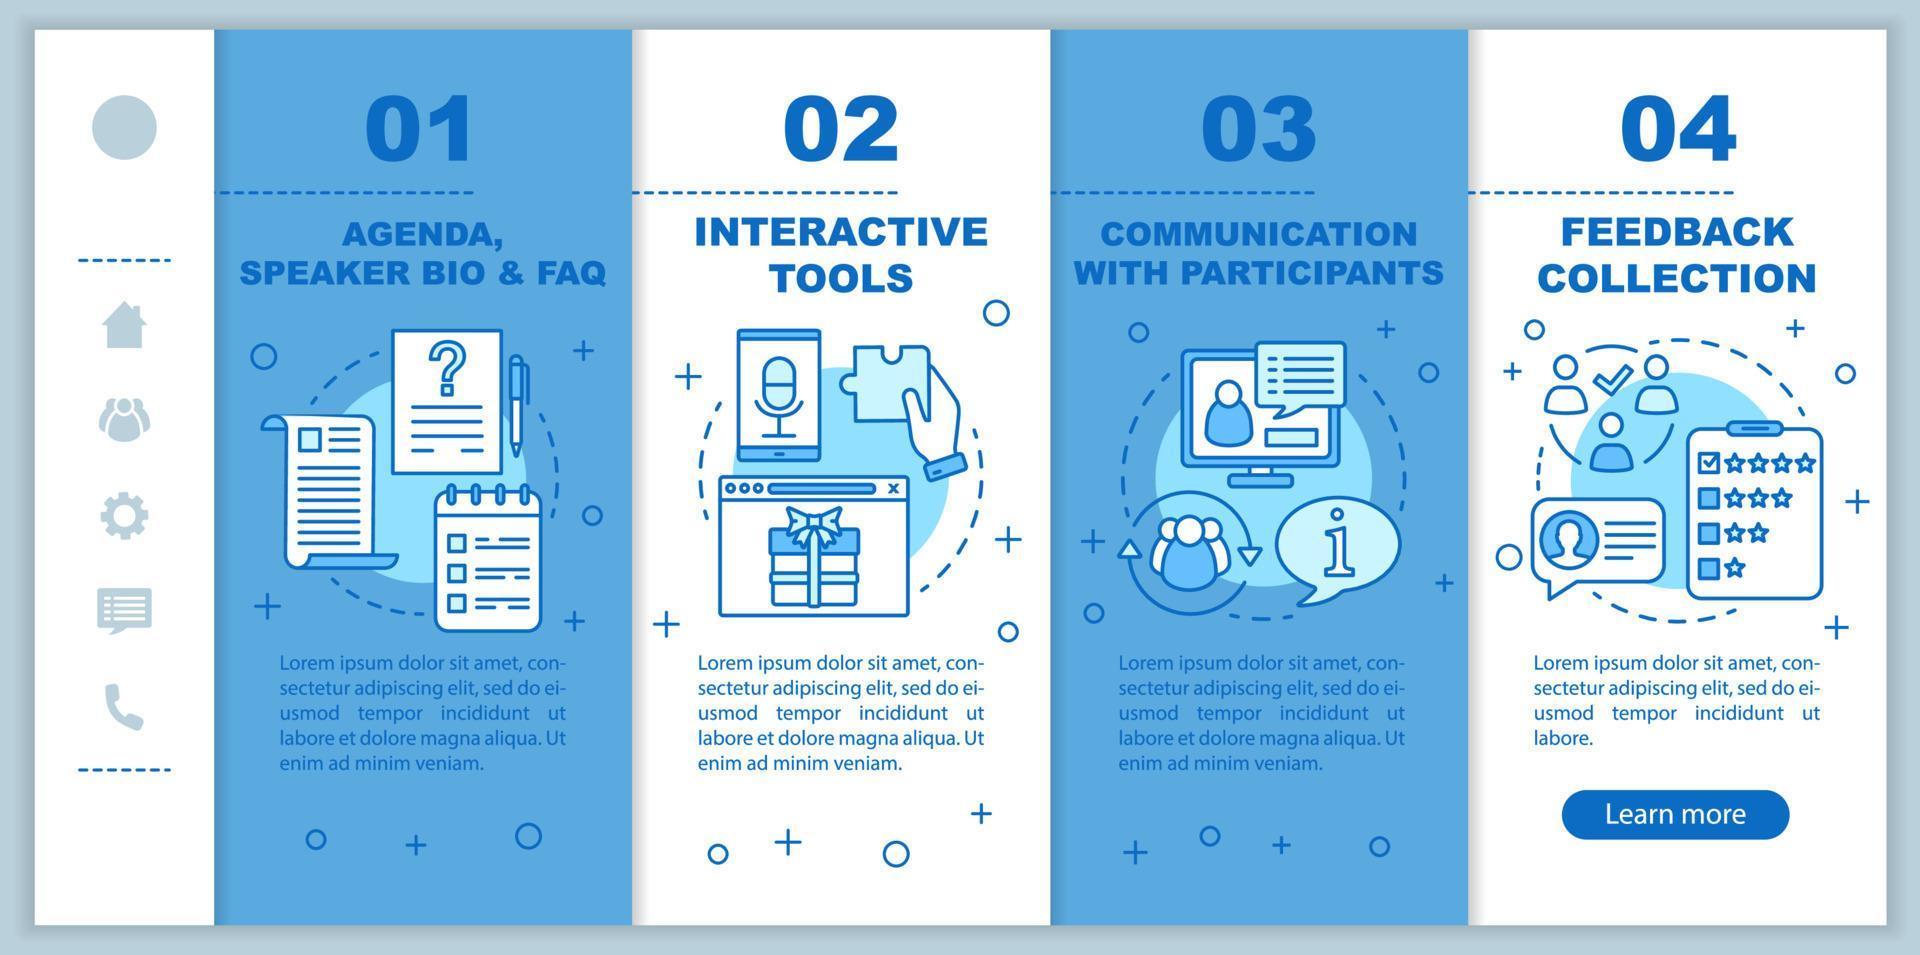 Event app onboarding mobile web pages vector template. Interactive tools, communication with participants. Responsive smartphone website interface idea with linear illustrations